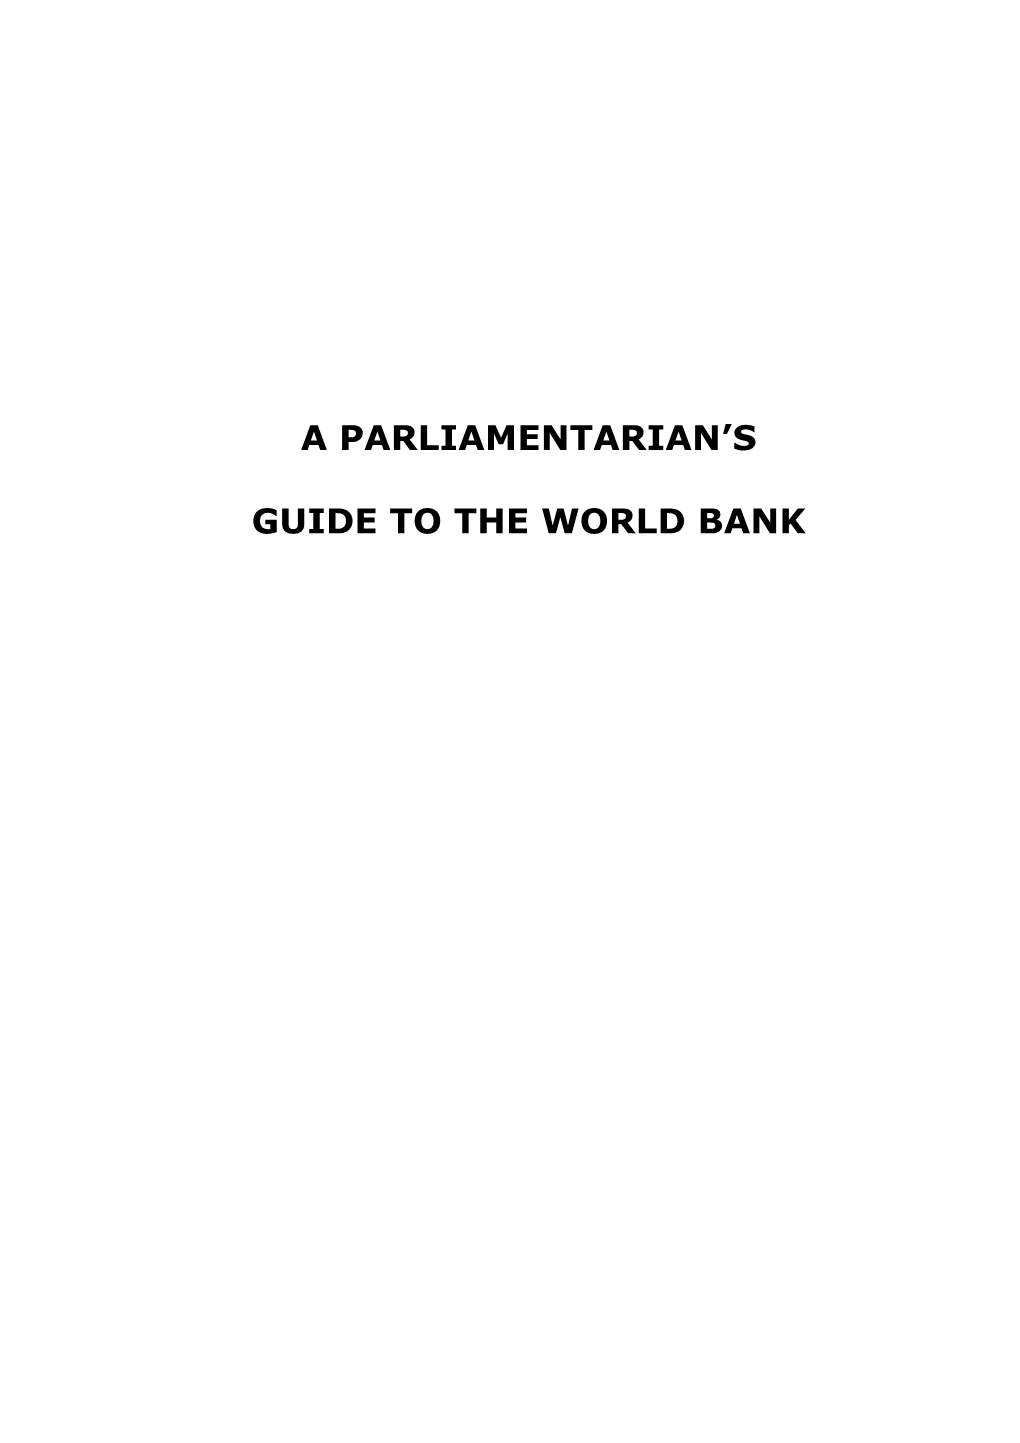 A Parliamentarian's Guide to the World Bank